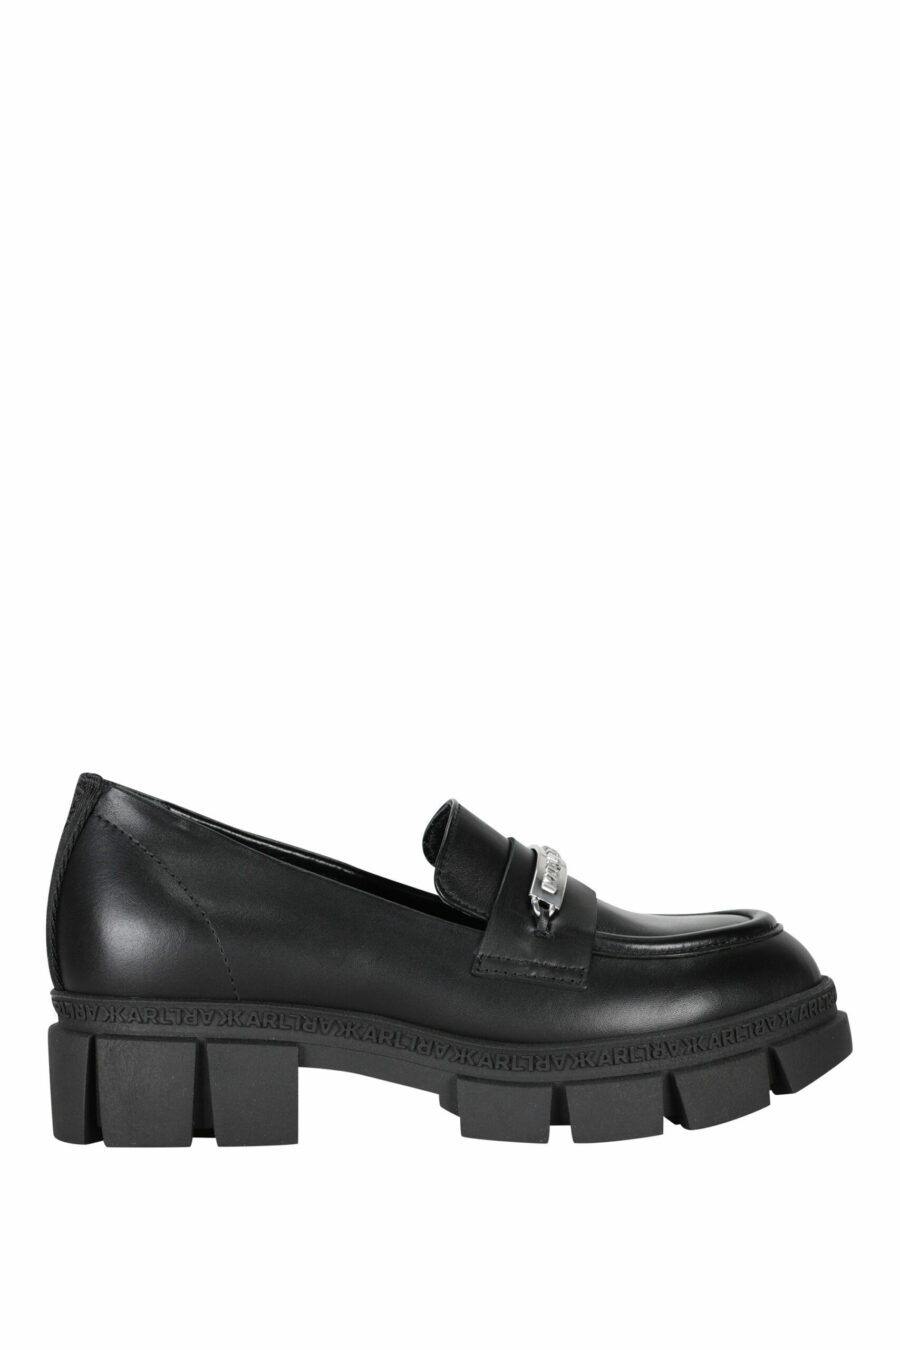 Black loafers with mini-logo and platform - 5059529284977 scaled